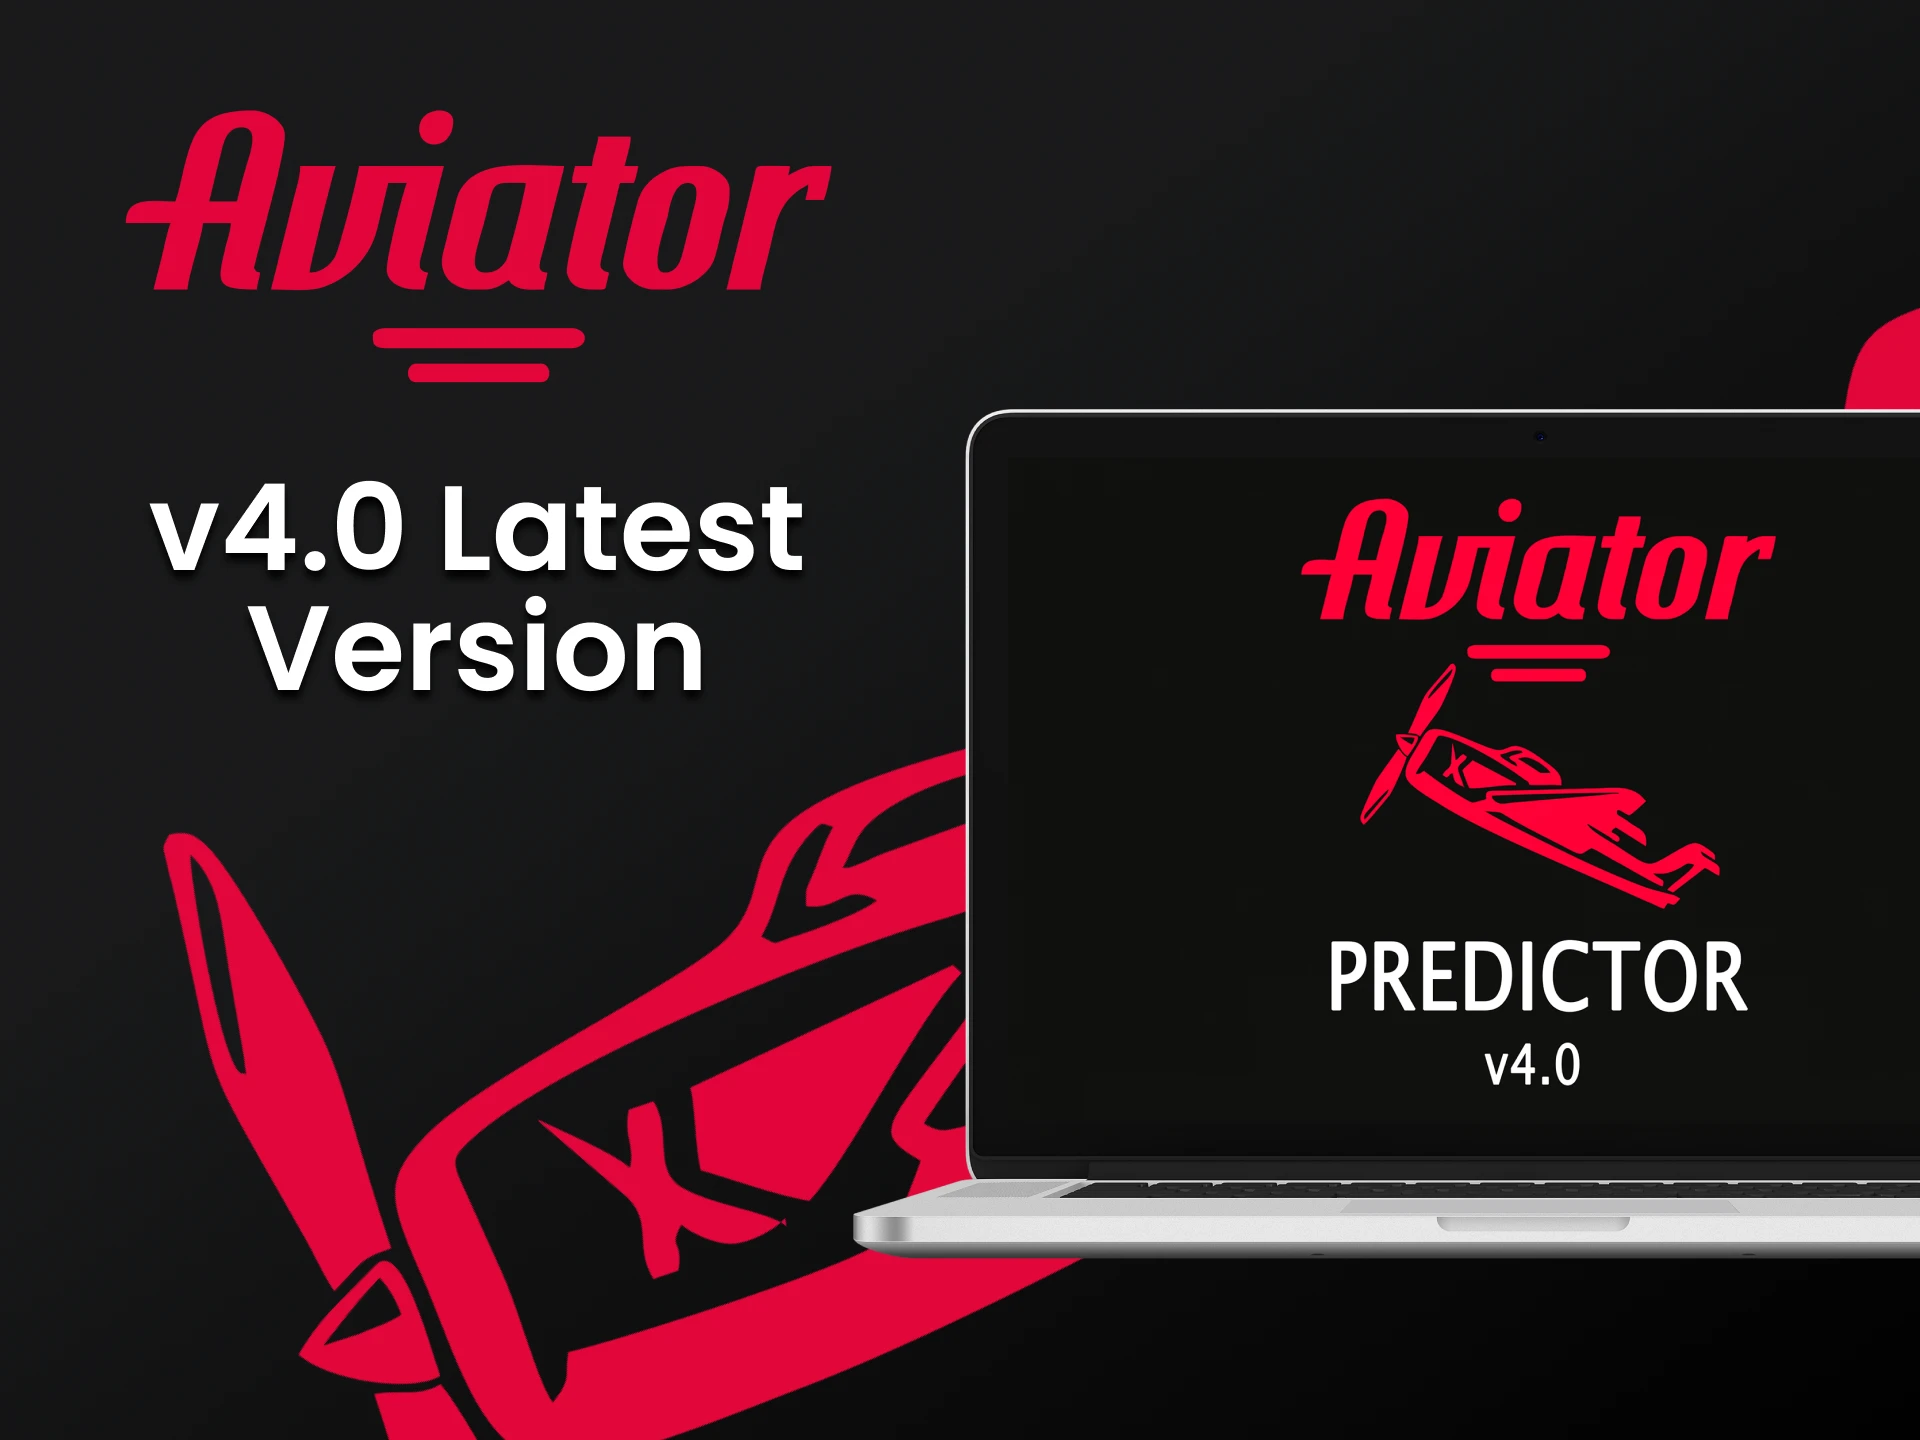 We will talk about the latest version of Predictor for the game Aviator.